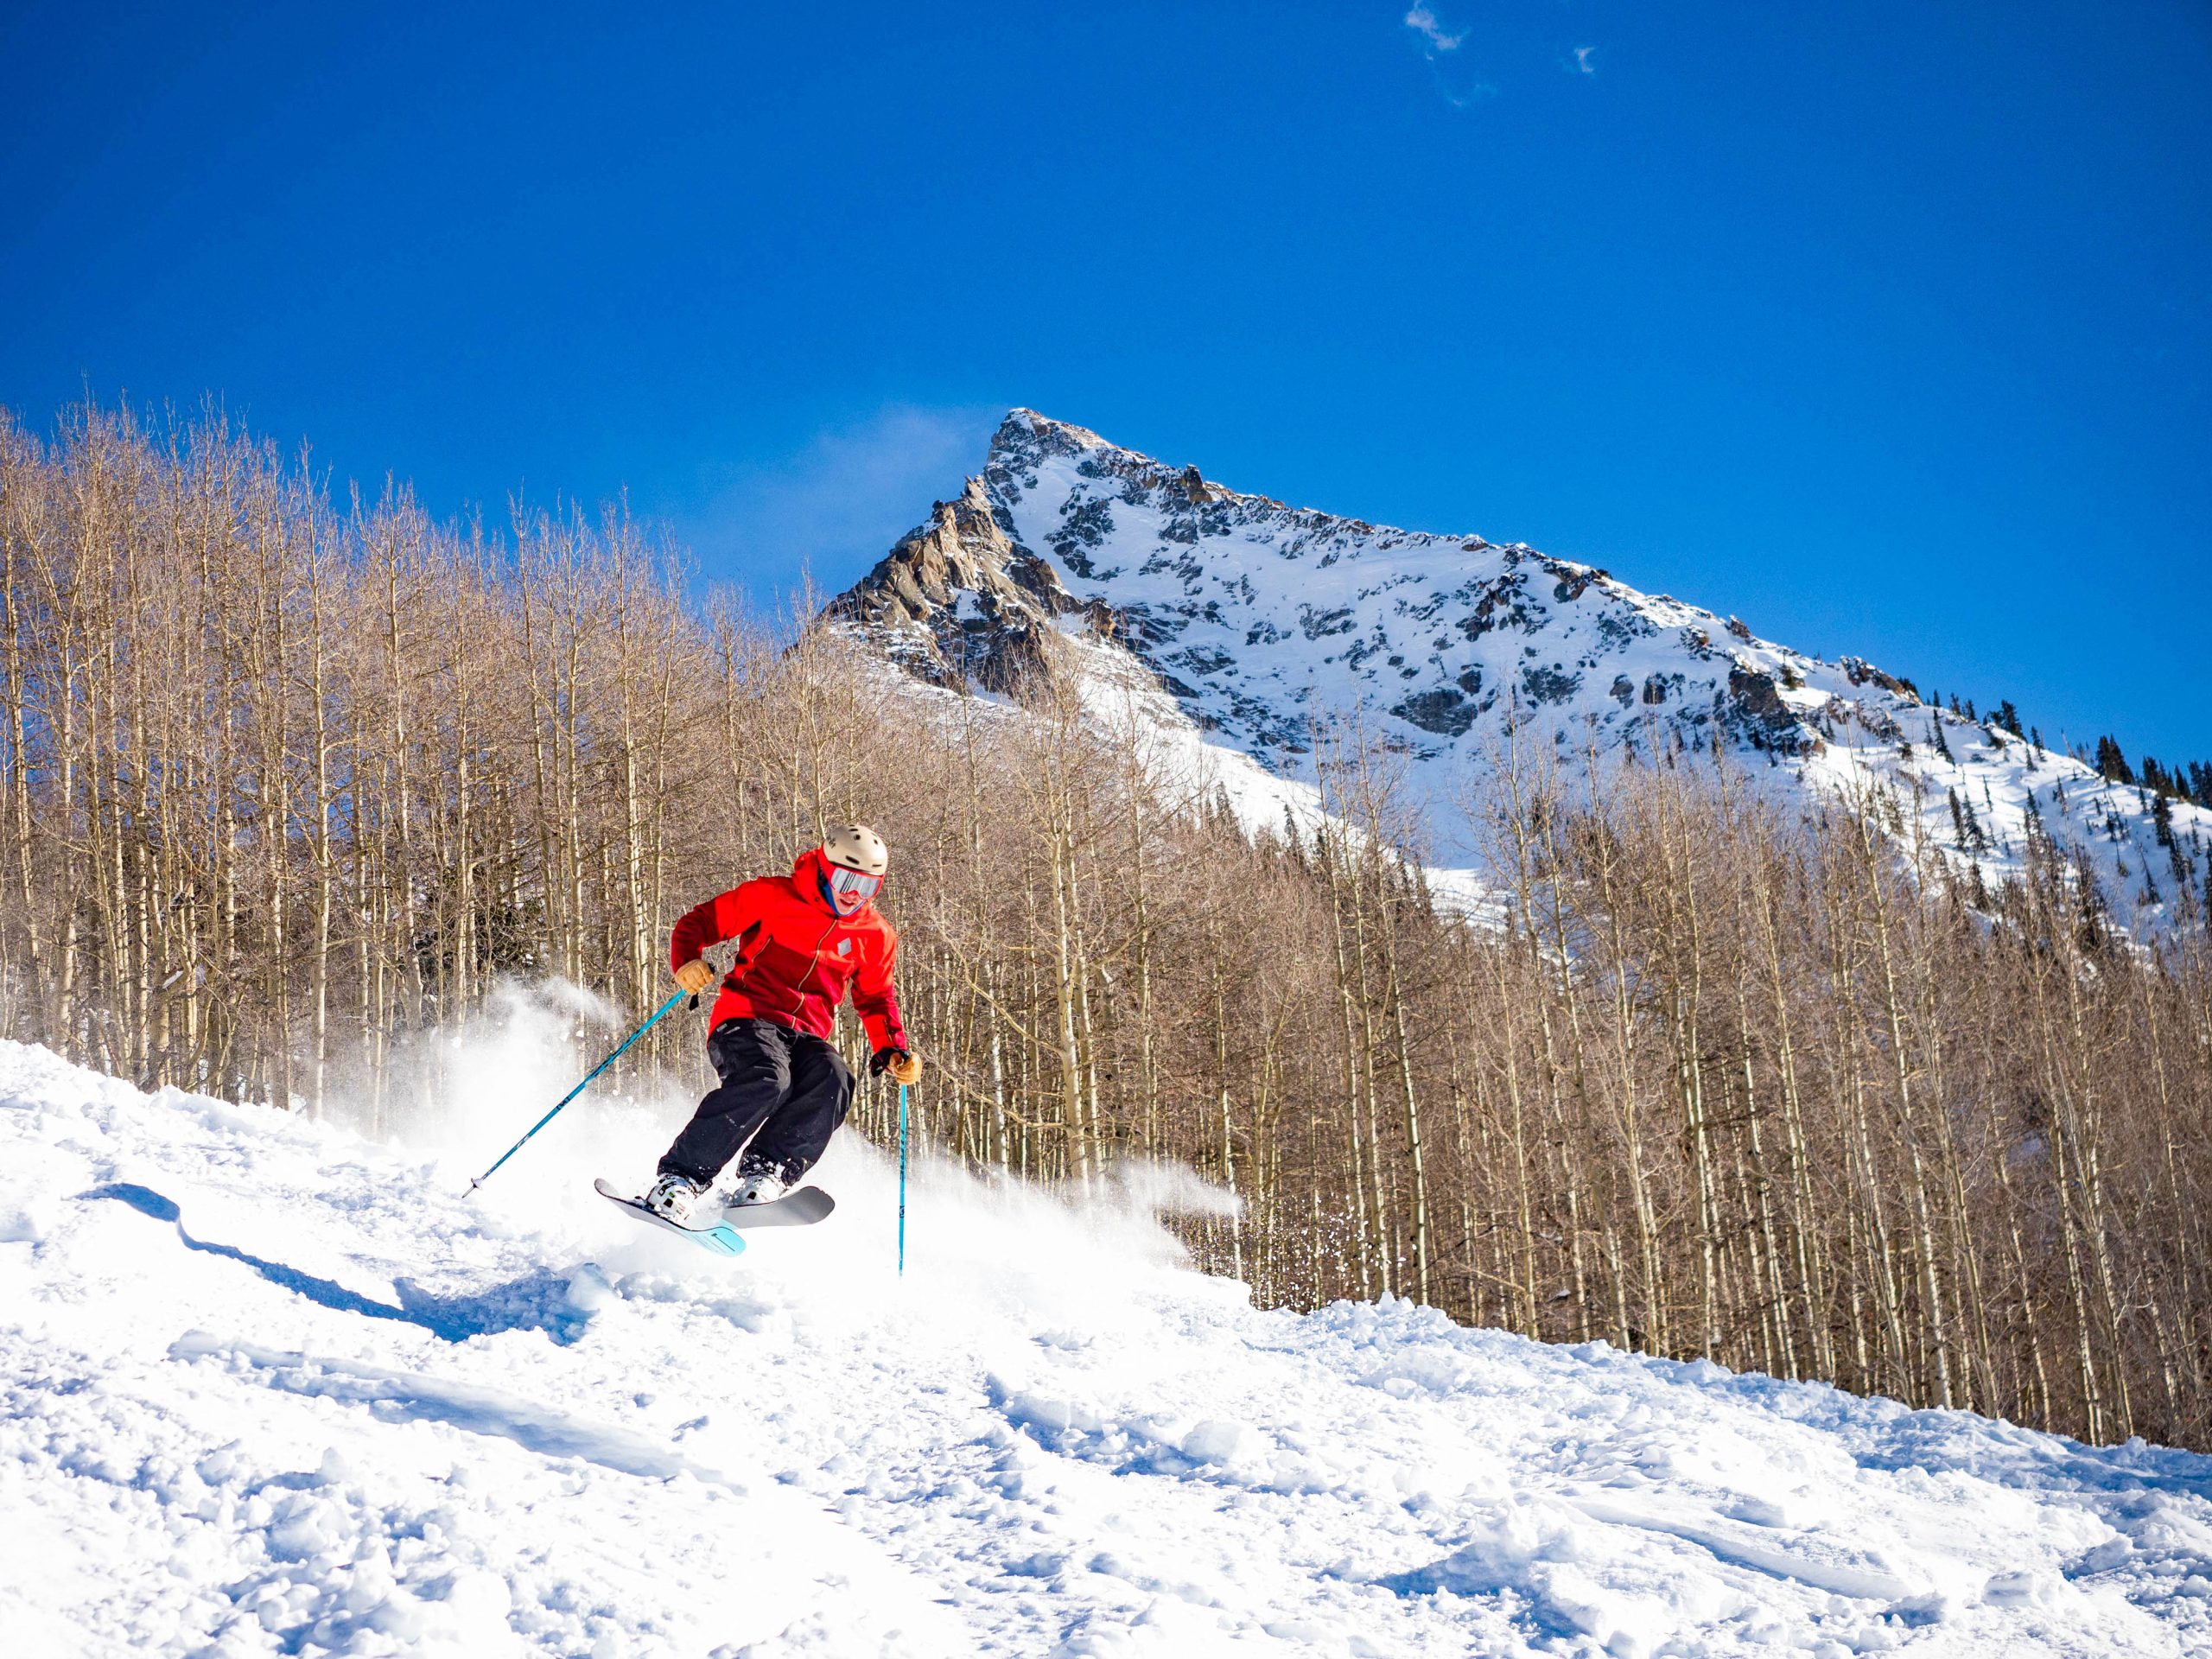 A skier on an ungroomed run. Crested Butte is known for steep skiing